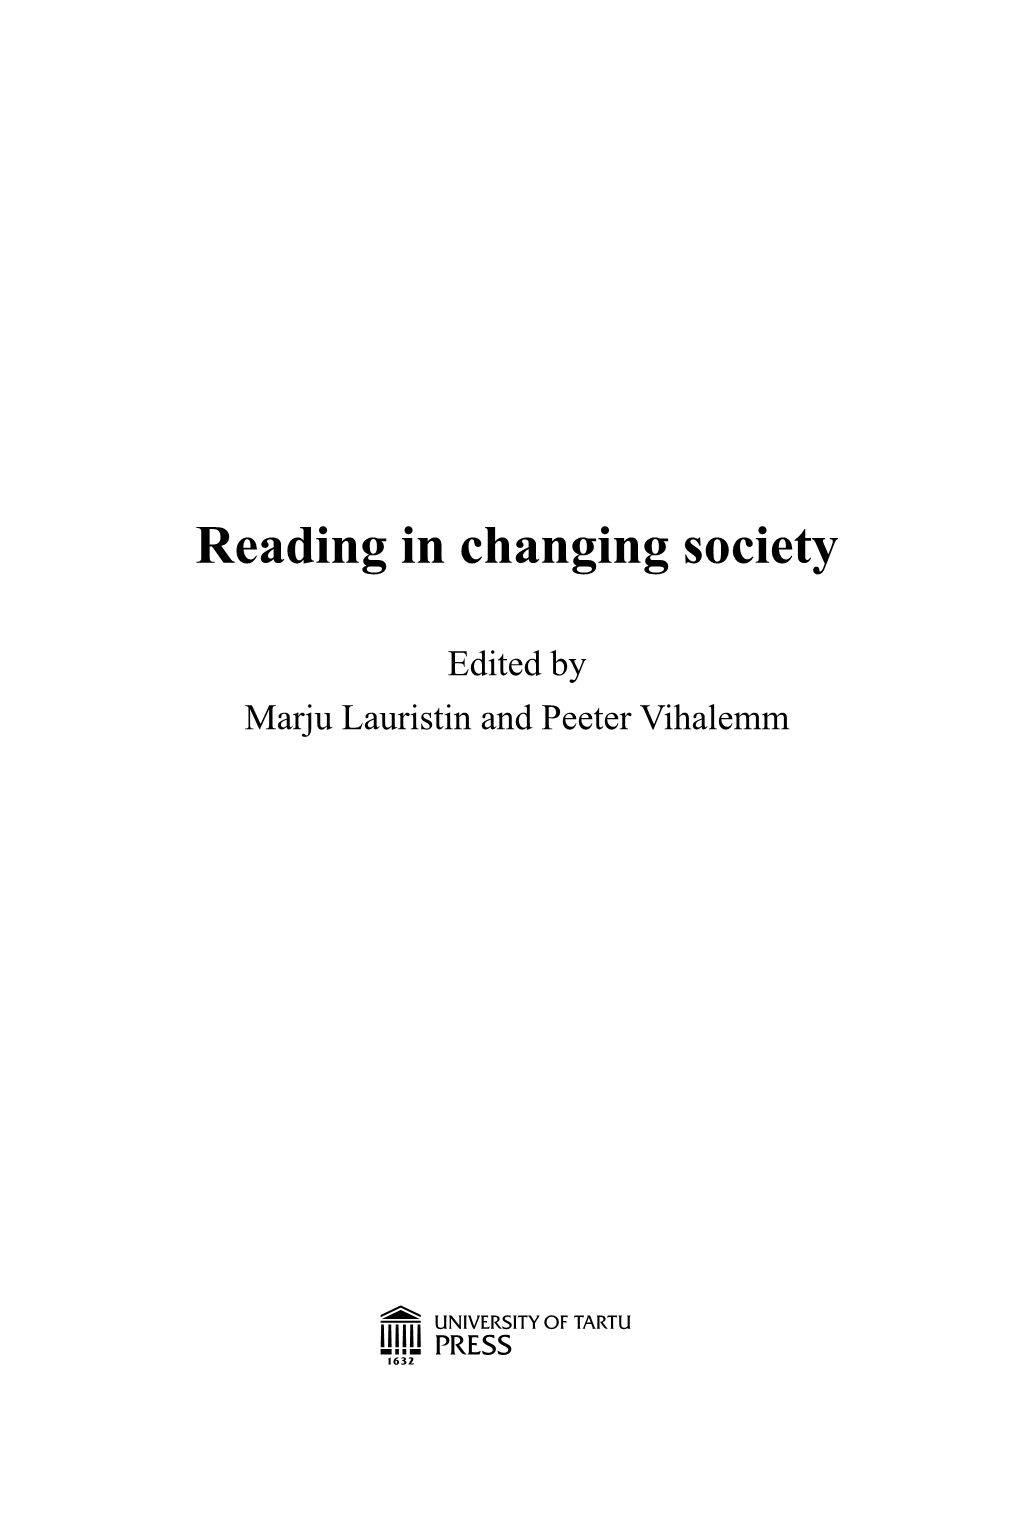 Reading in Changing Society